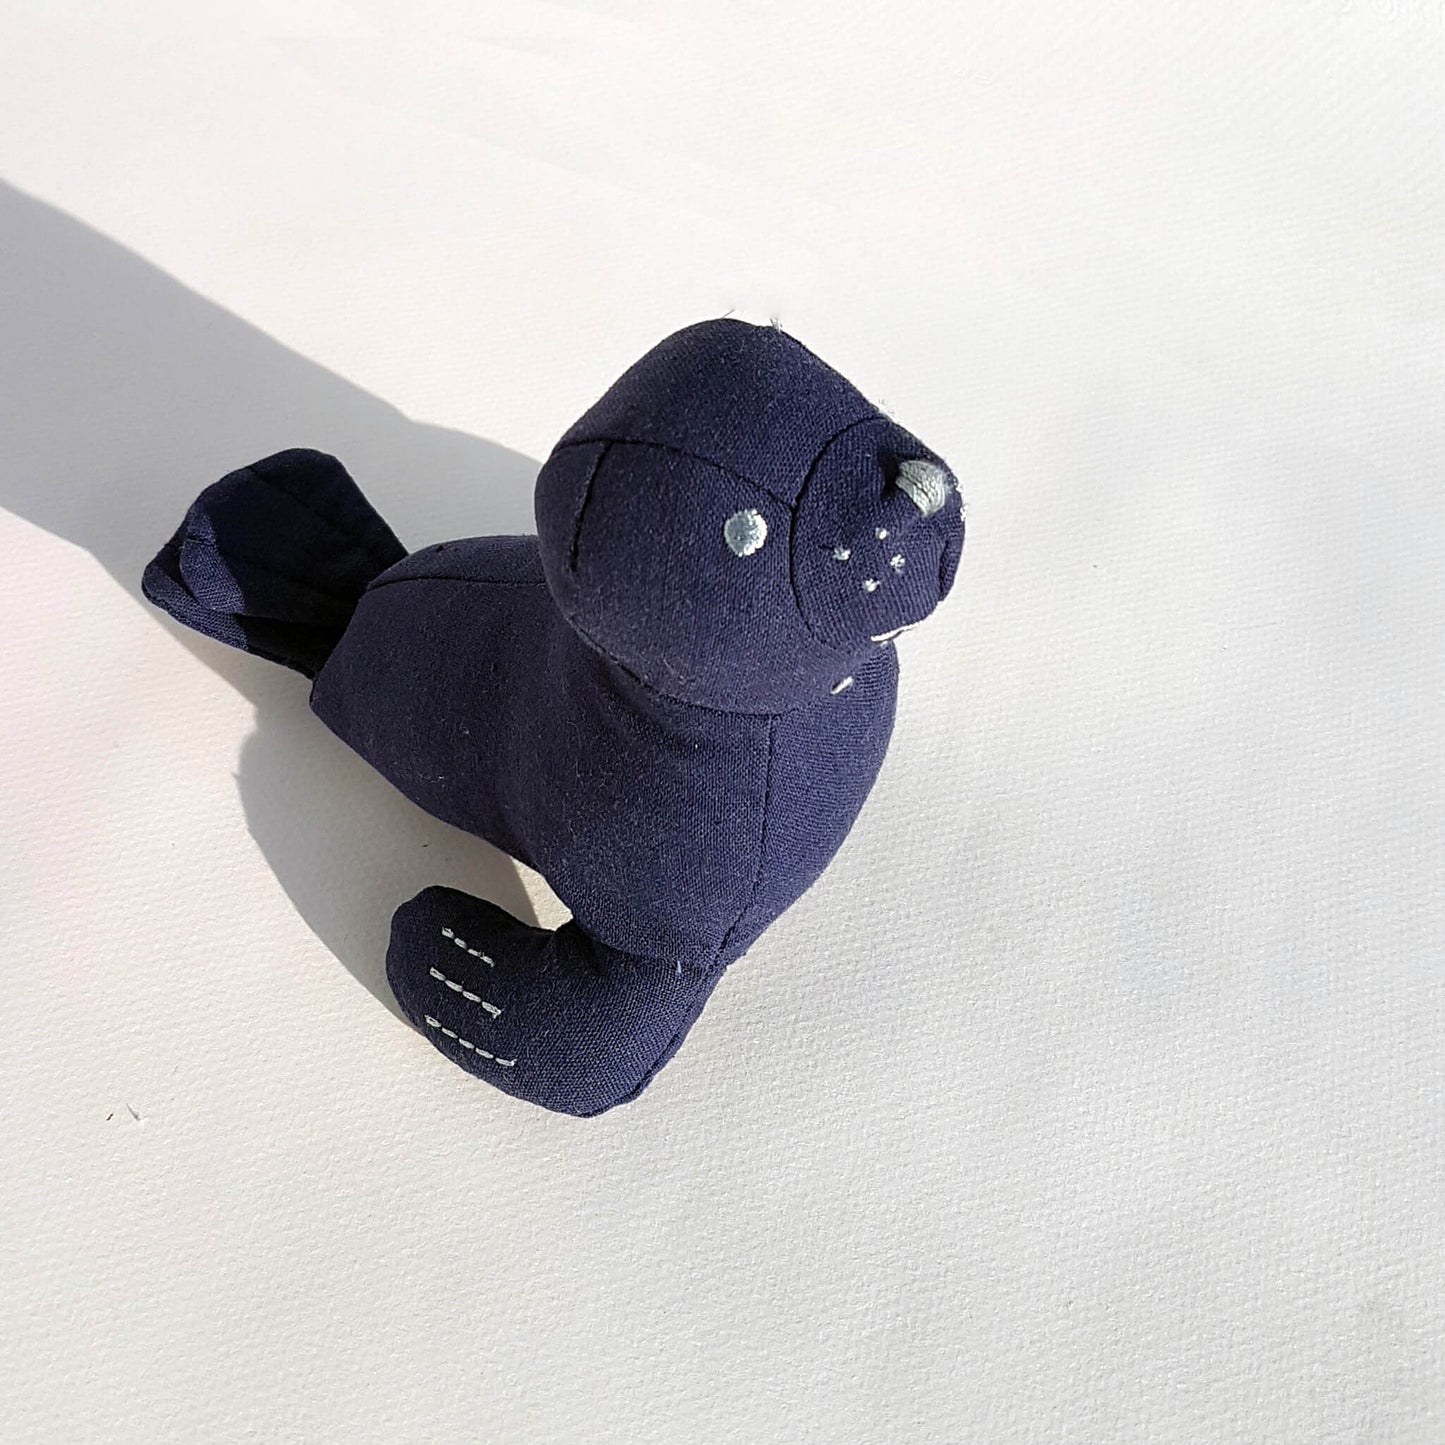 Small Seal Cuddle Toy - Unik by Nature